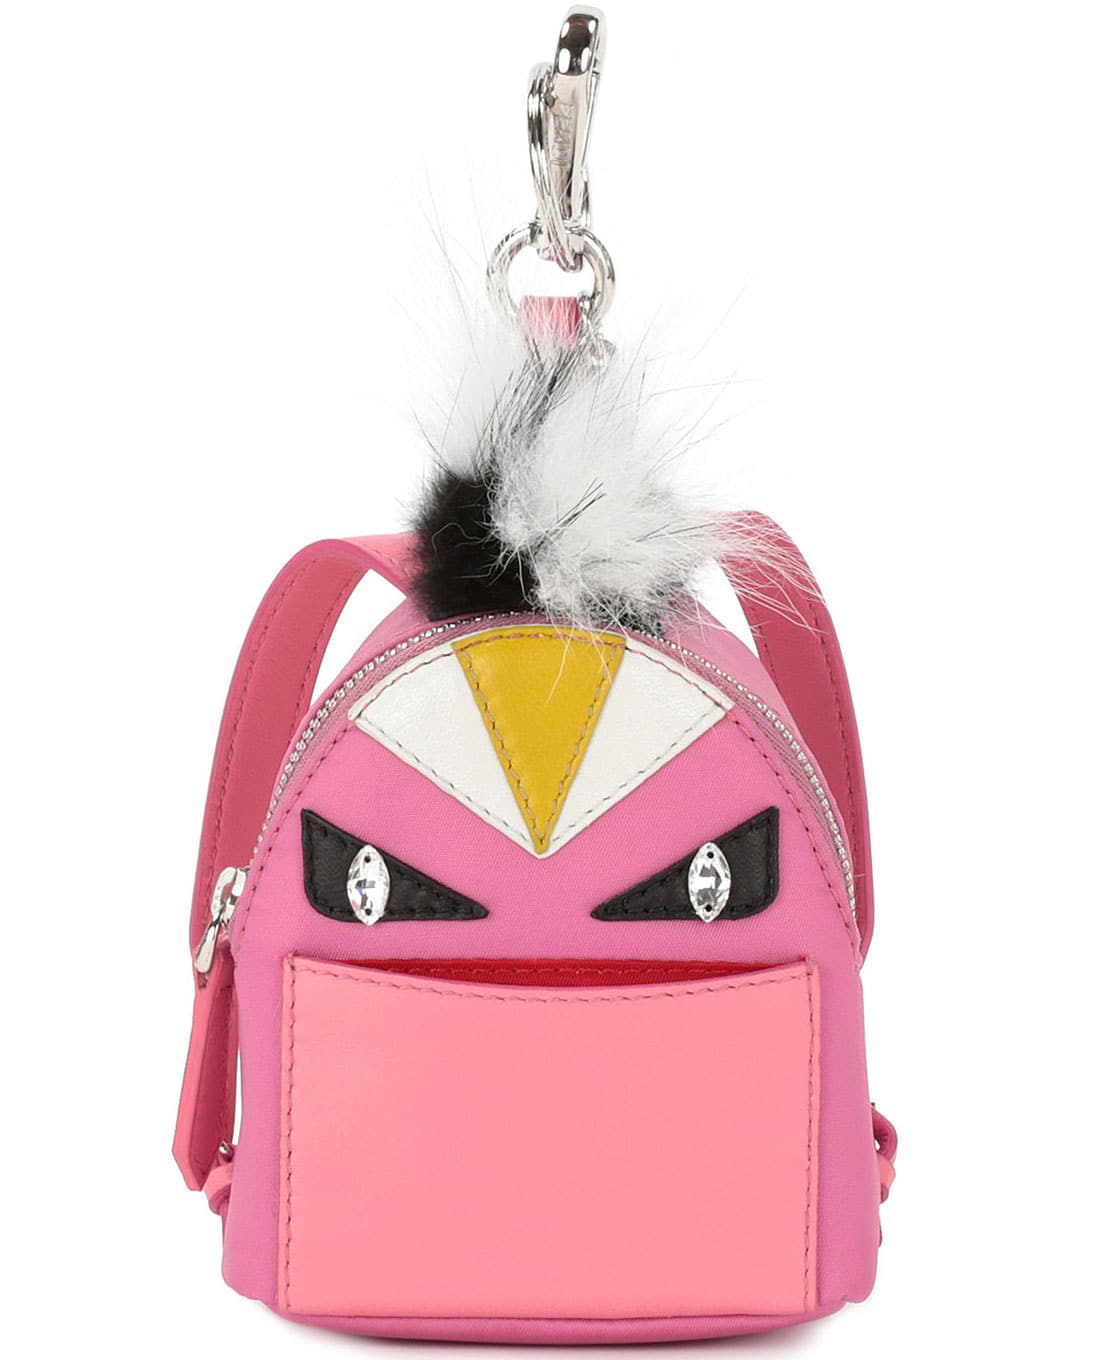 Fendi Bag Bug Backpack Charm for the Resort 2016 Collection - Spotted ...